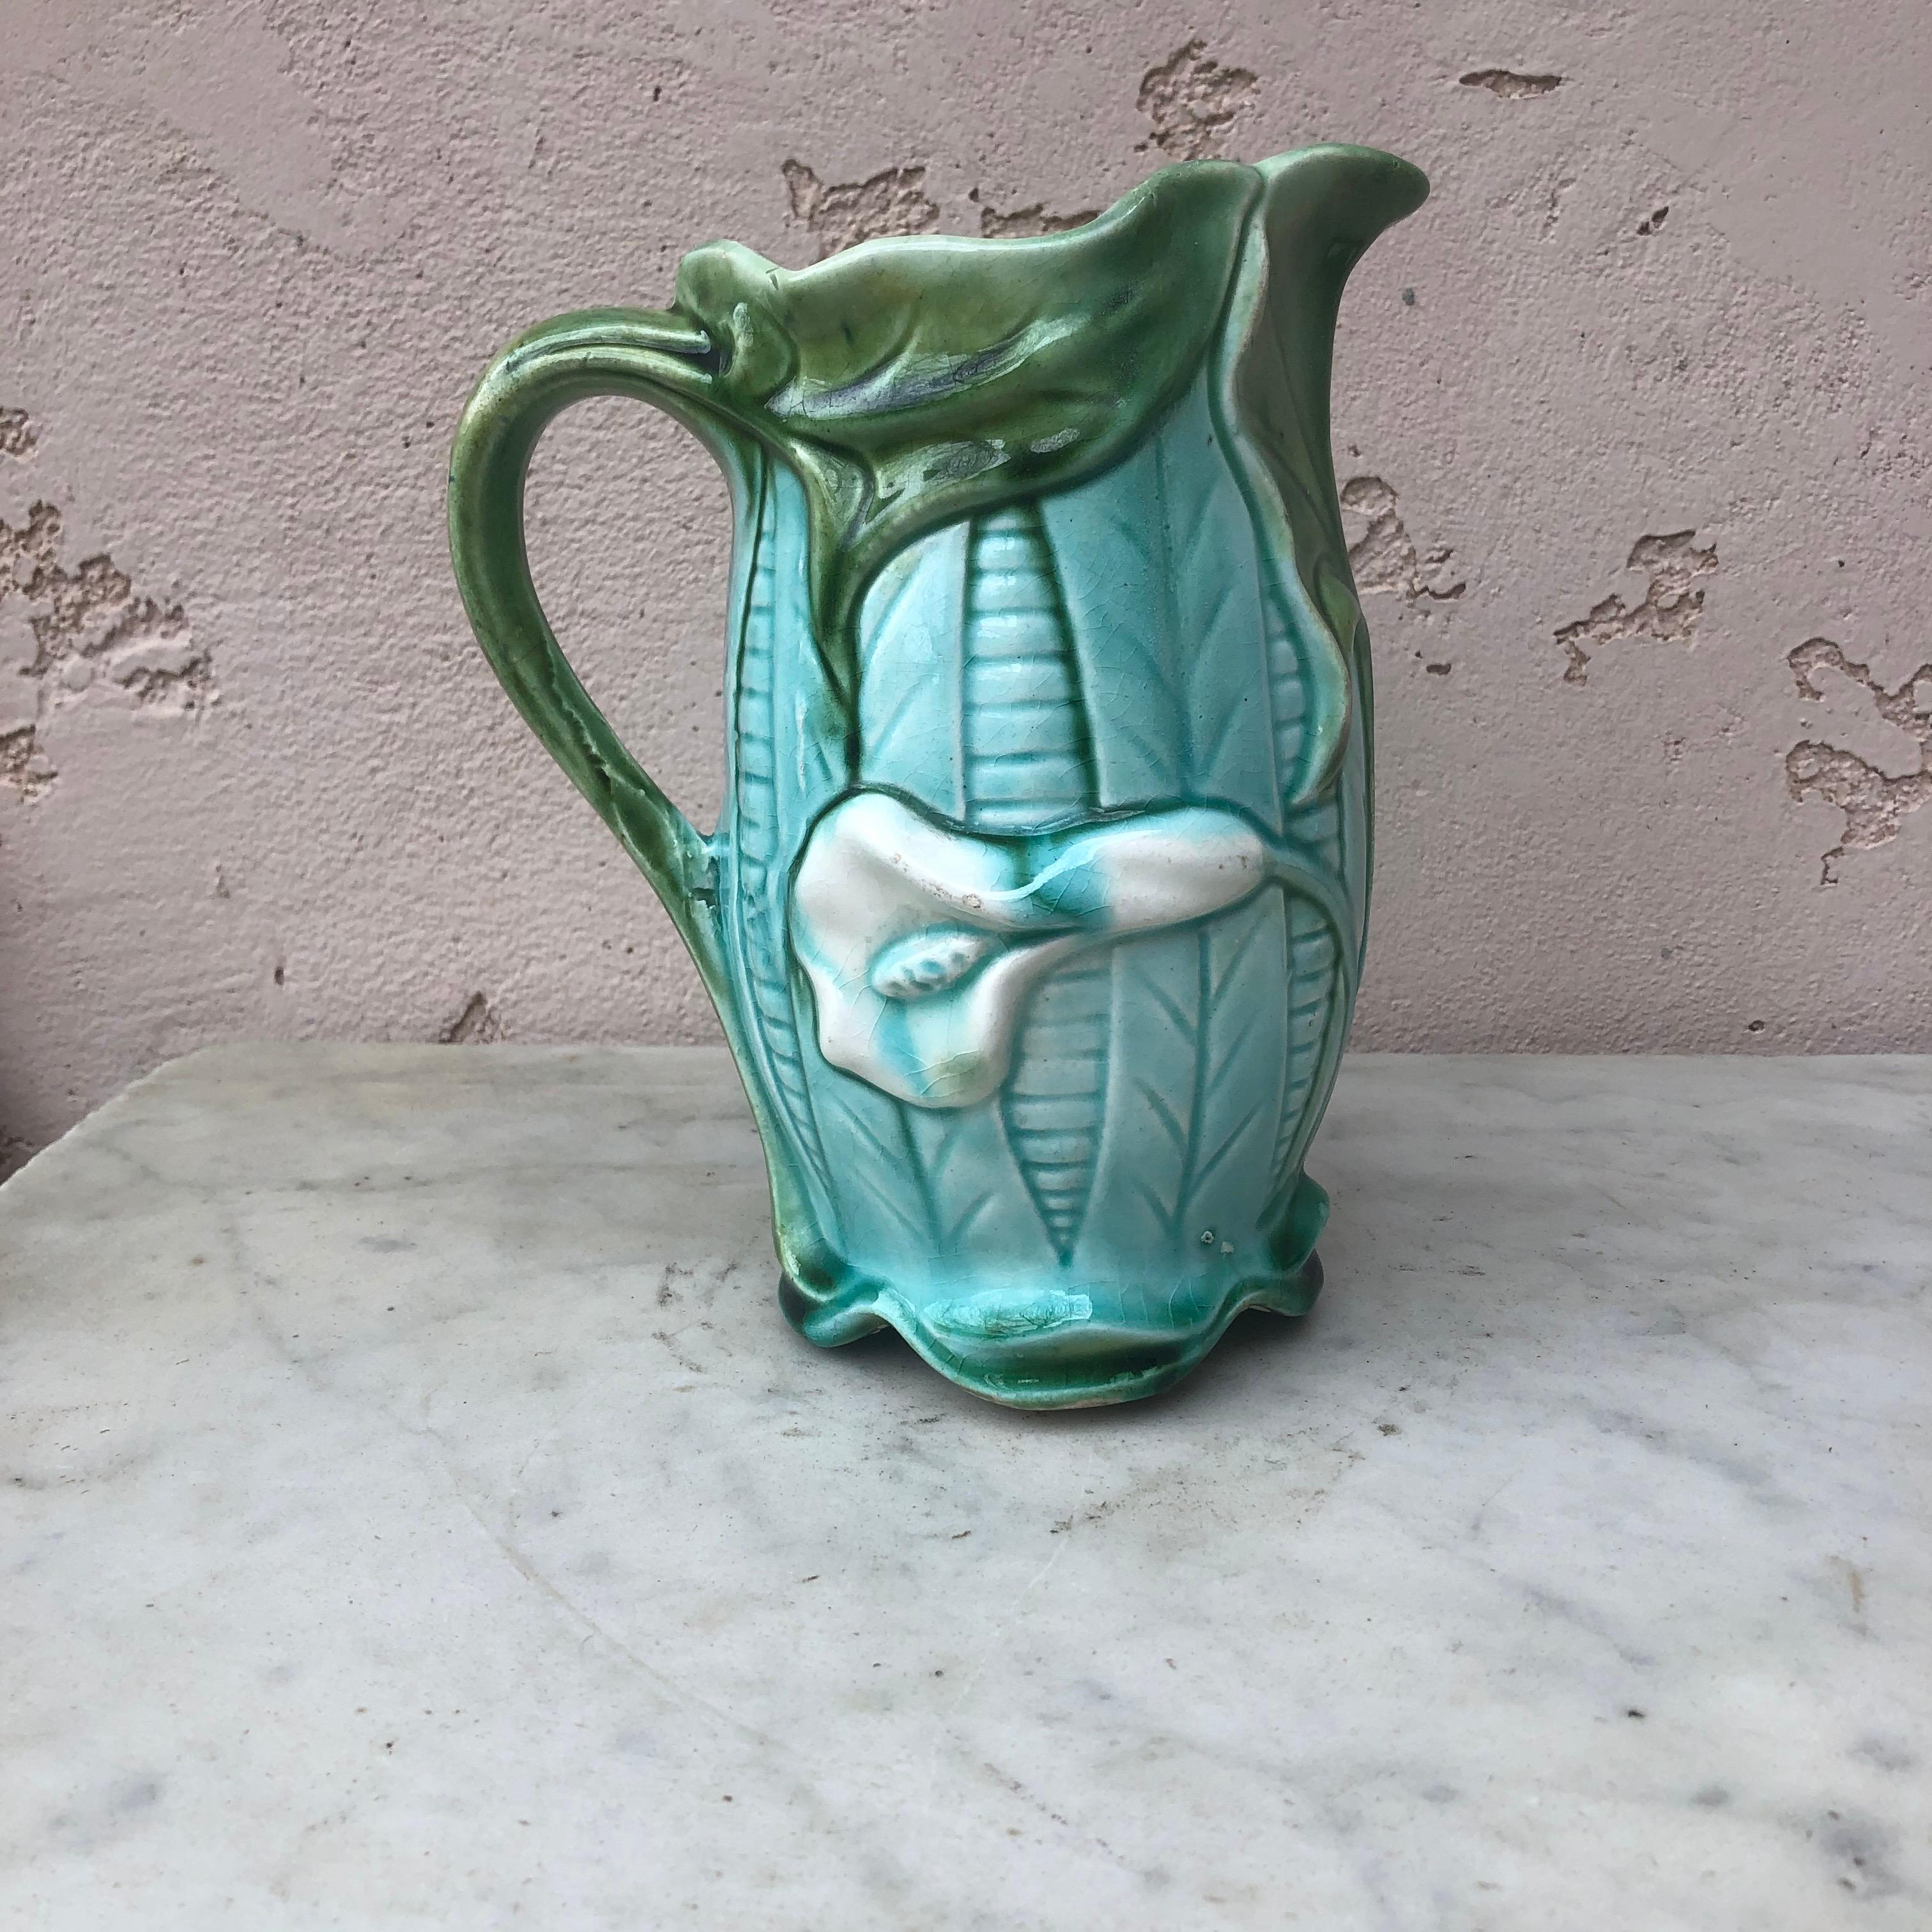 French Majolica arum pitcher circa 1890 from North of France.
Art Nouveau.